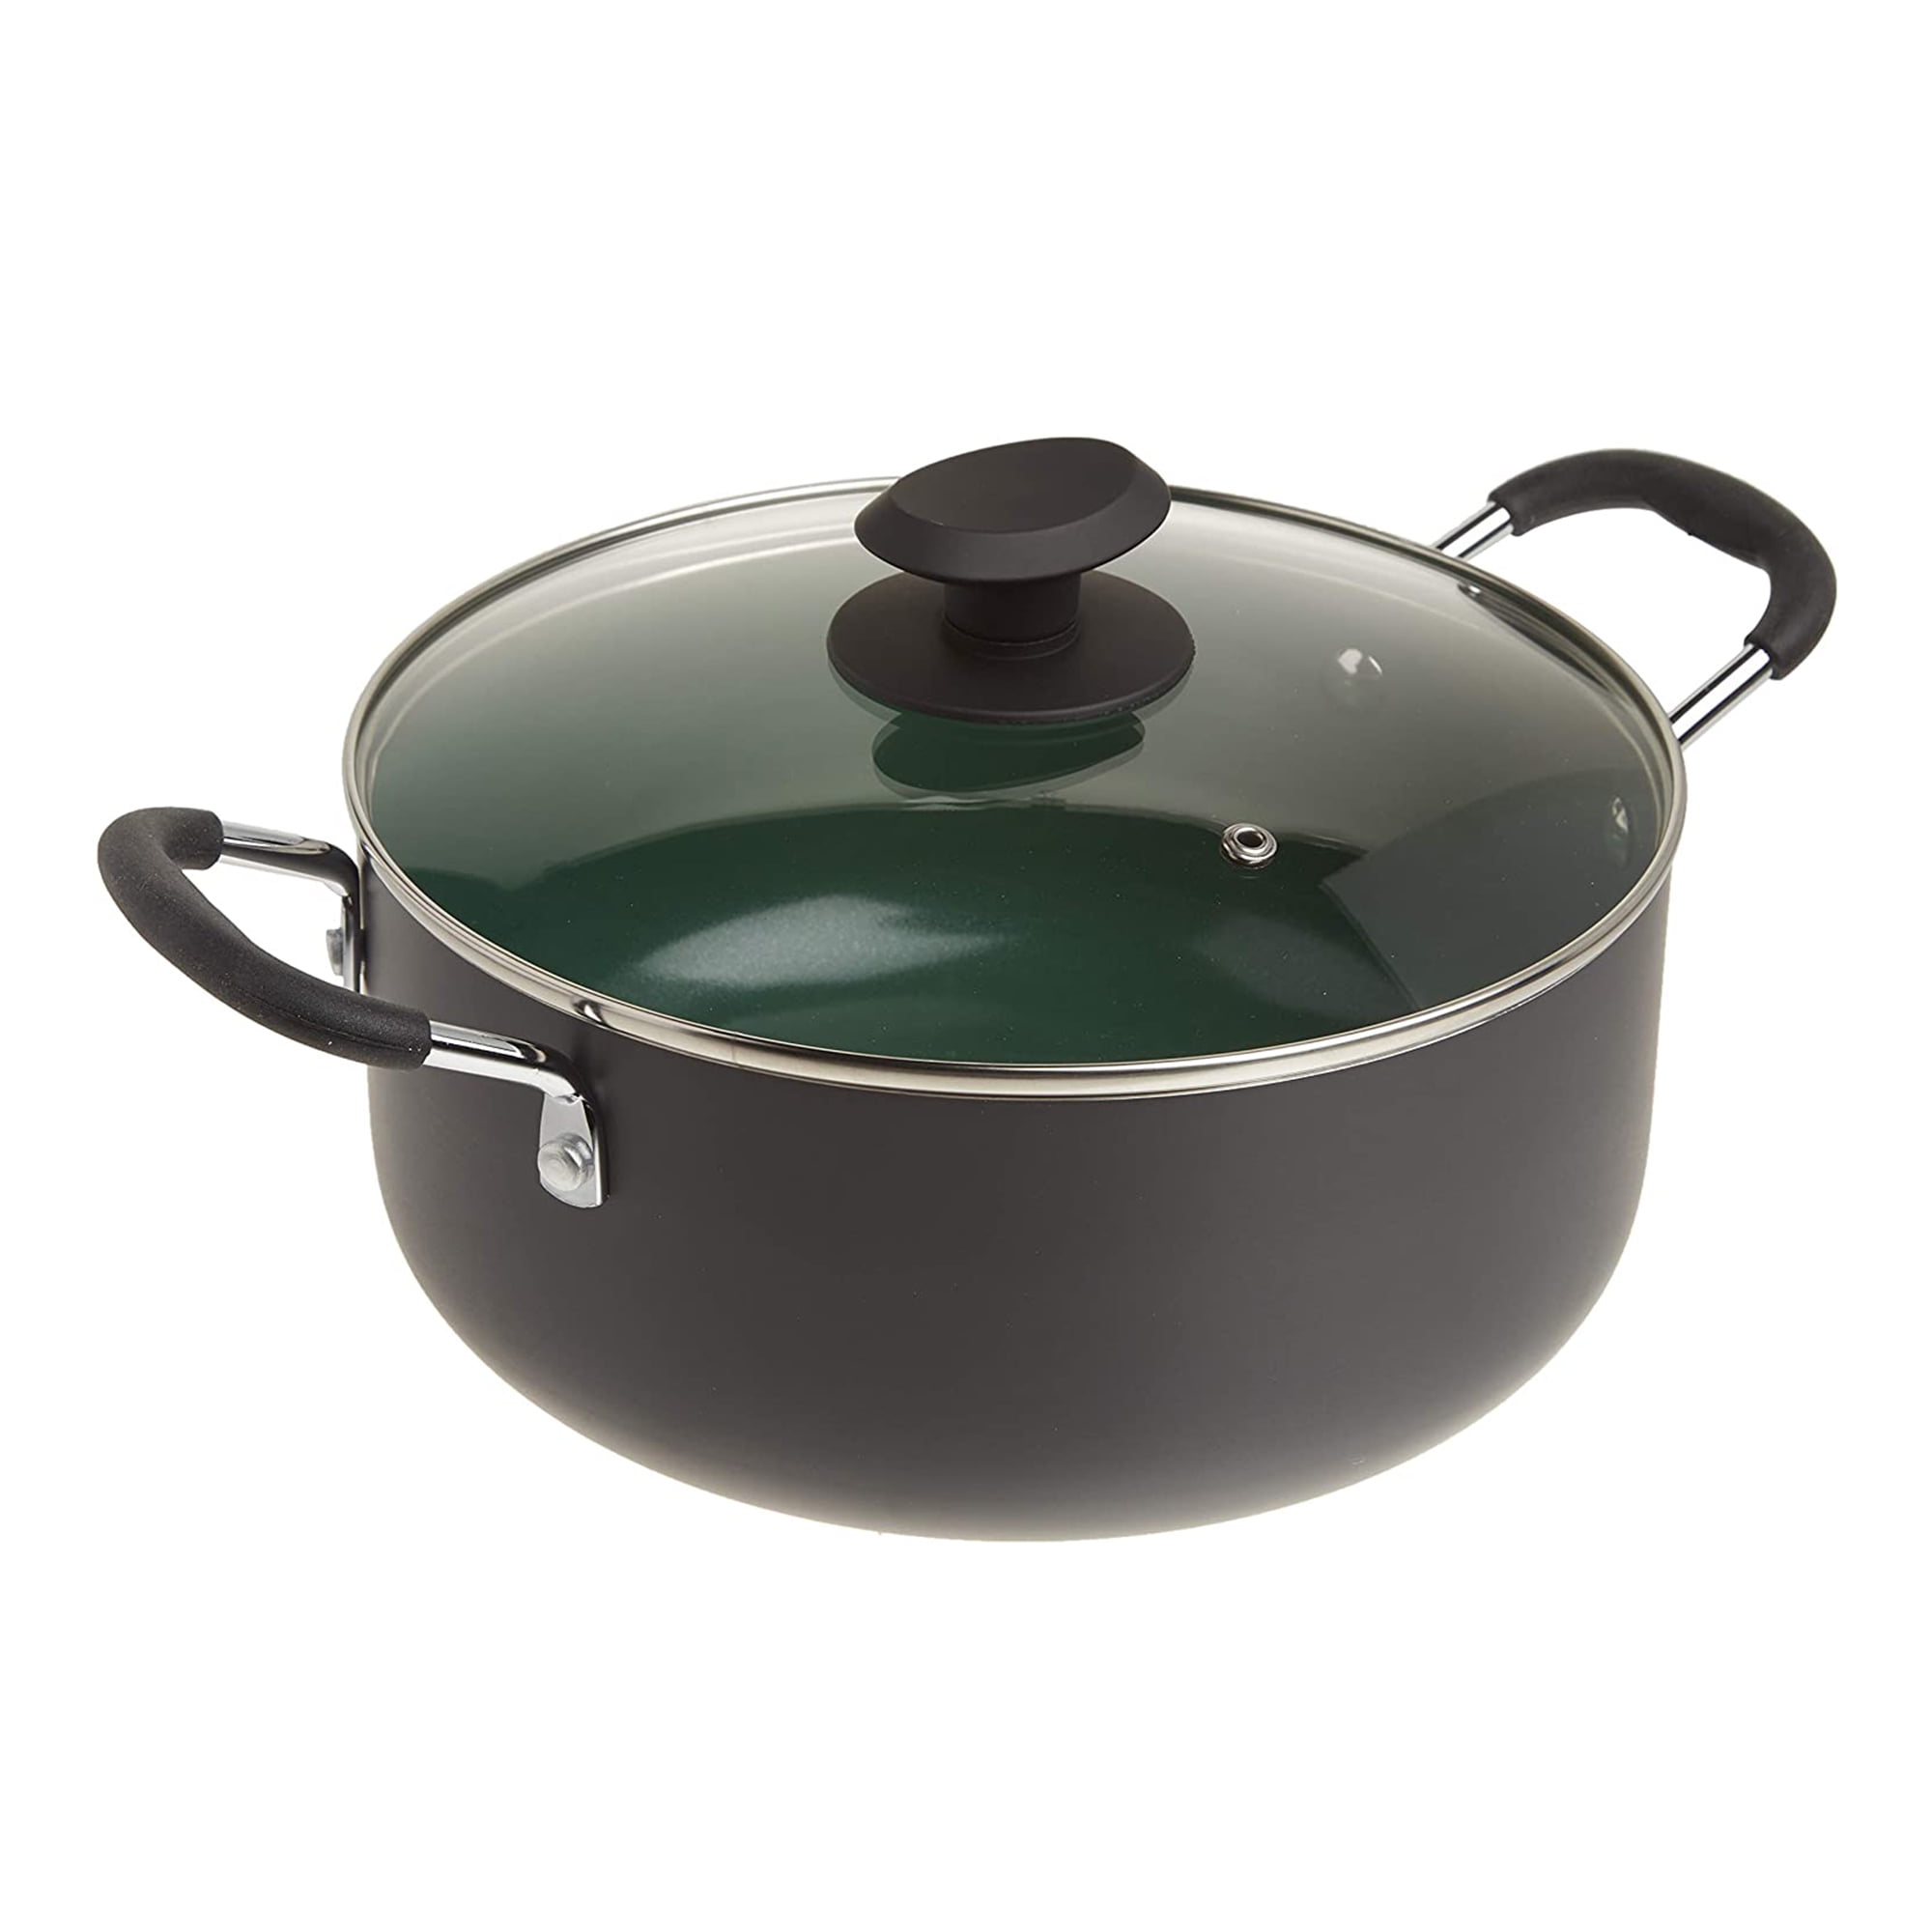 Nutrichef Dutch Oven Pot with Lid - Non-Stick Kitchen Cookware with Tempered Glass Lids, 5 Quart